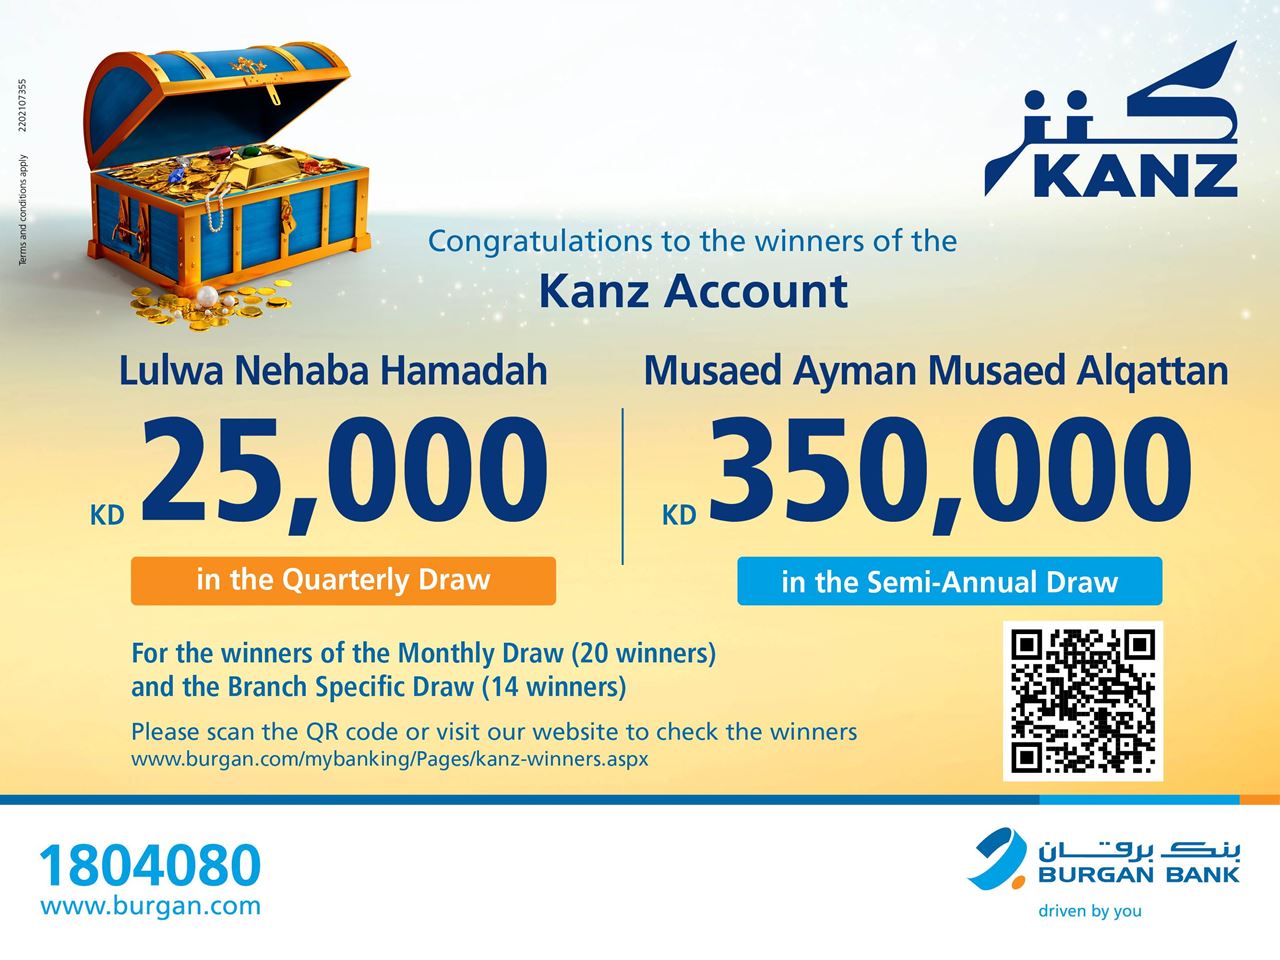 Burgan Bank Announces the First KD 350,000 Winner of the Kanz Account Semi-Annual Draw